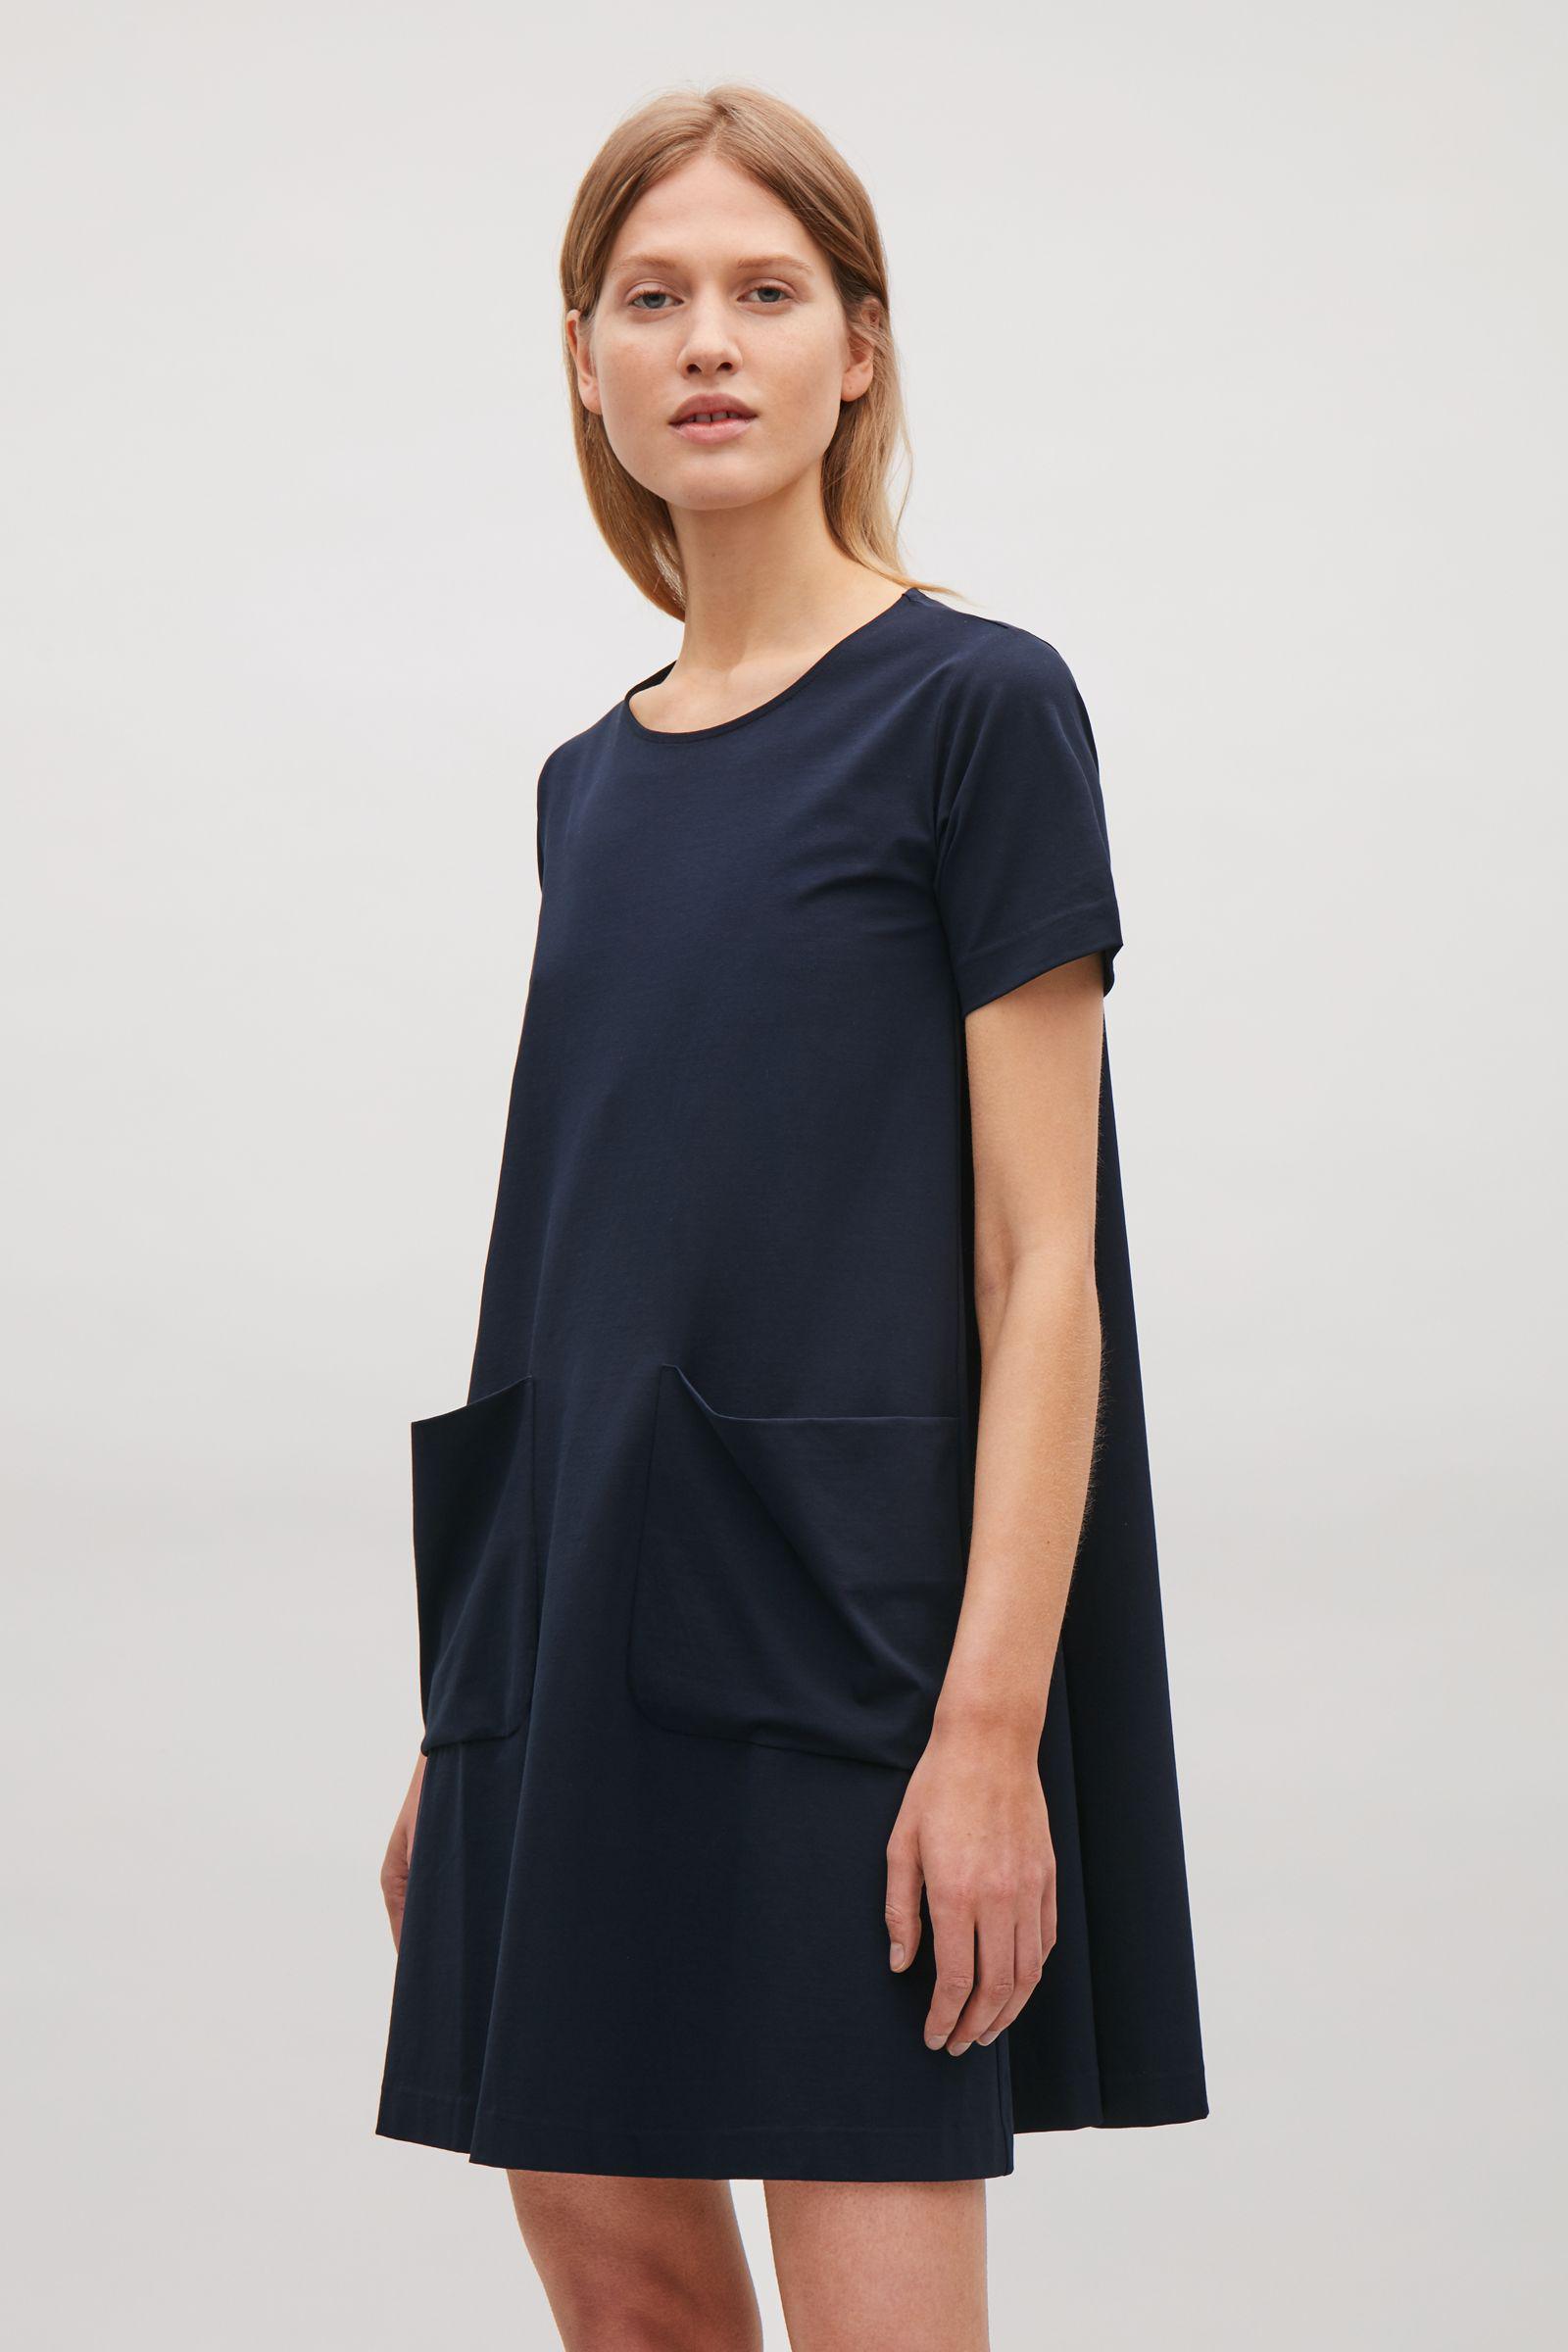 COS Cotton A-line Jersey Dress in Navy (Blue) - Lyst